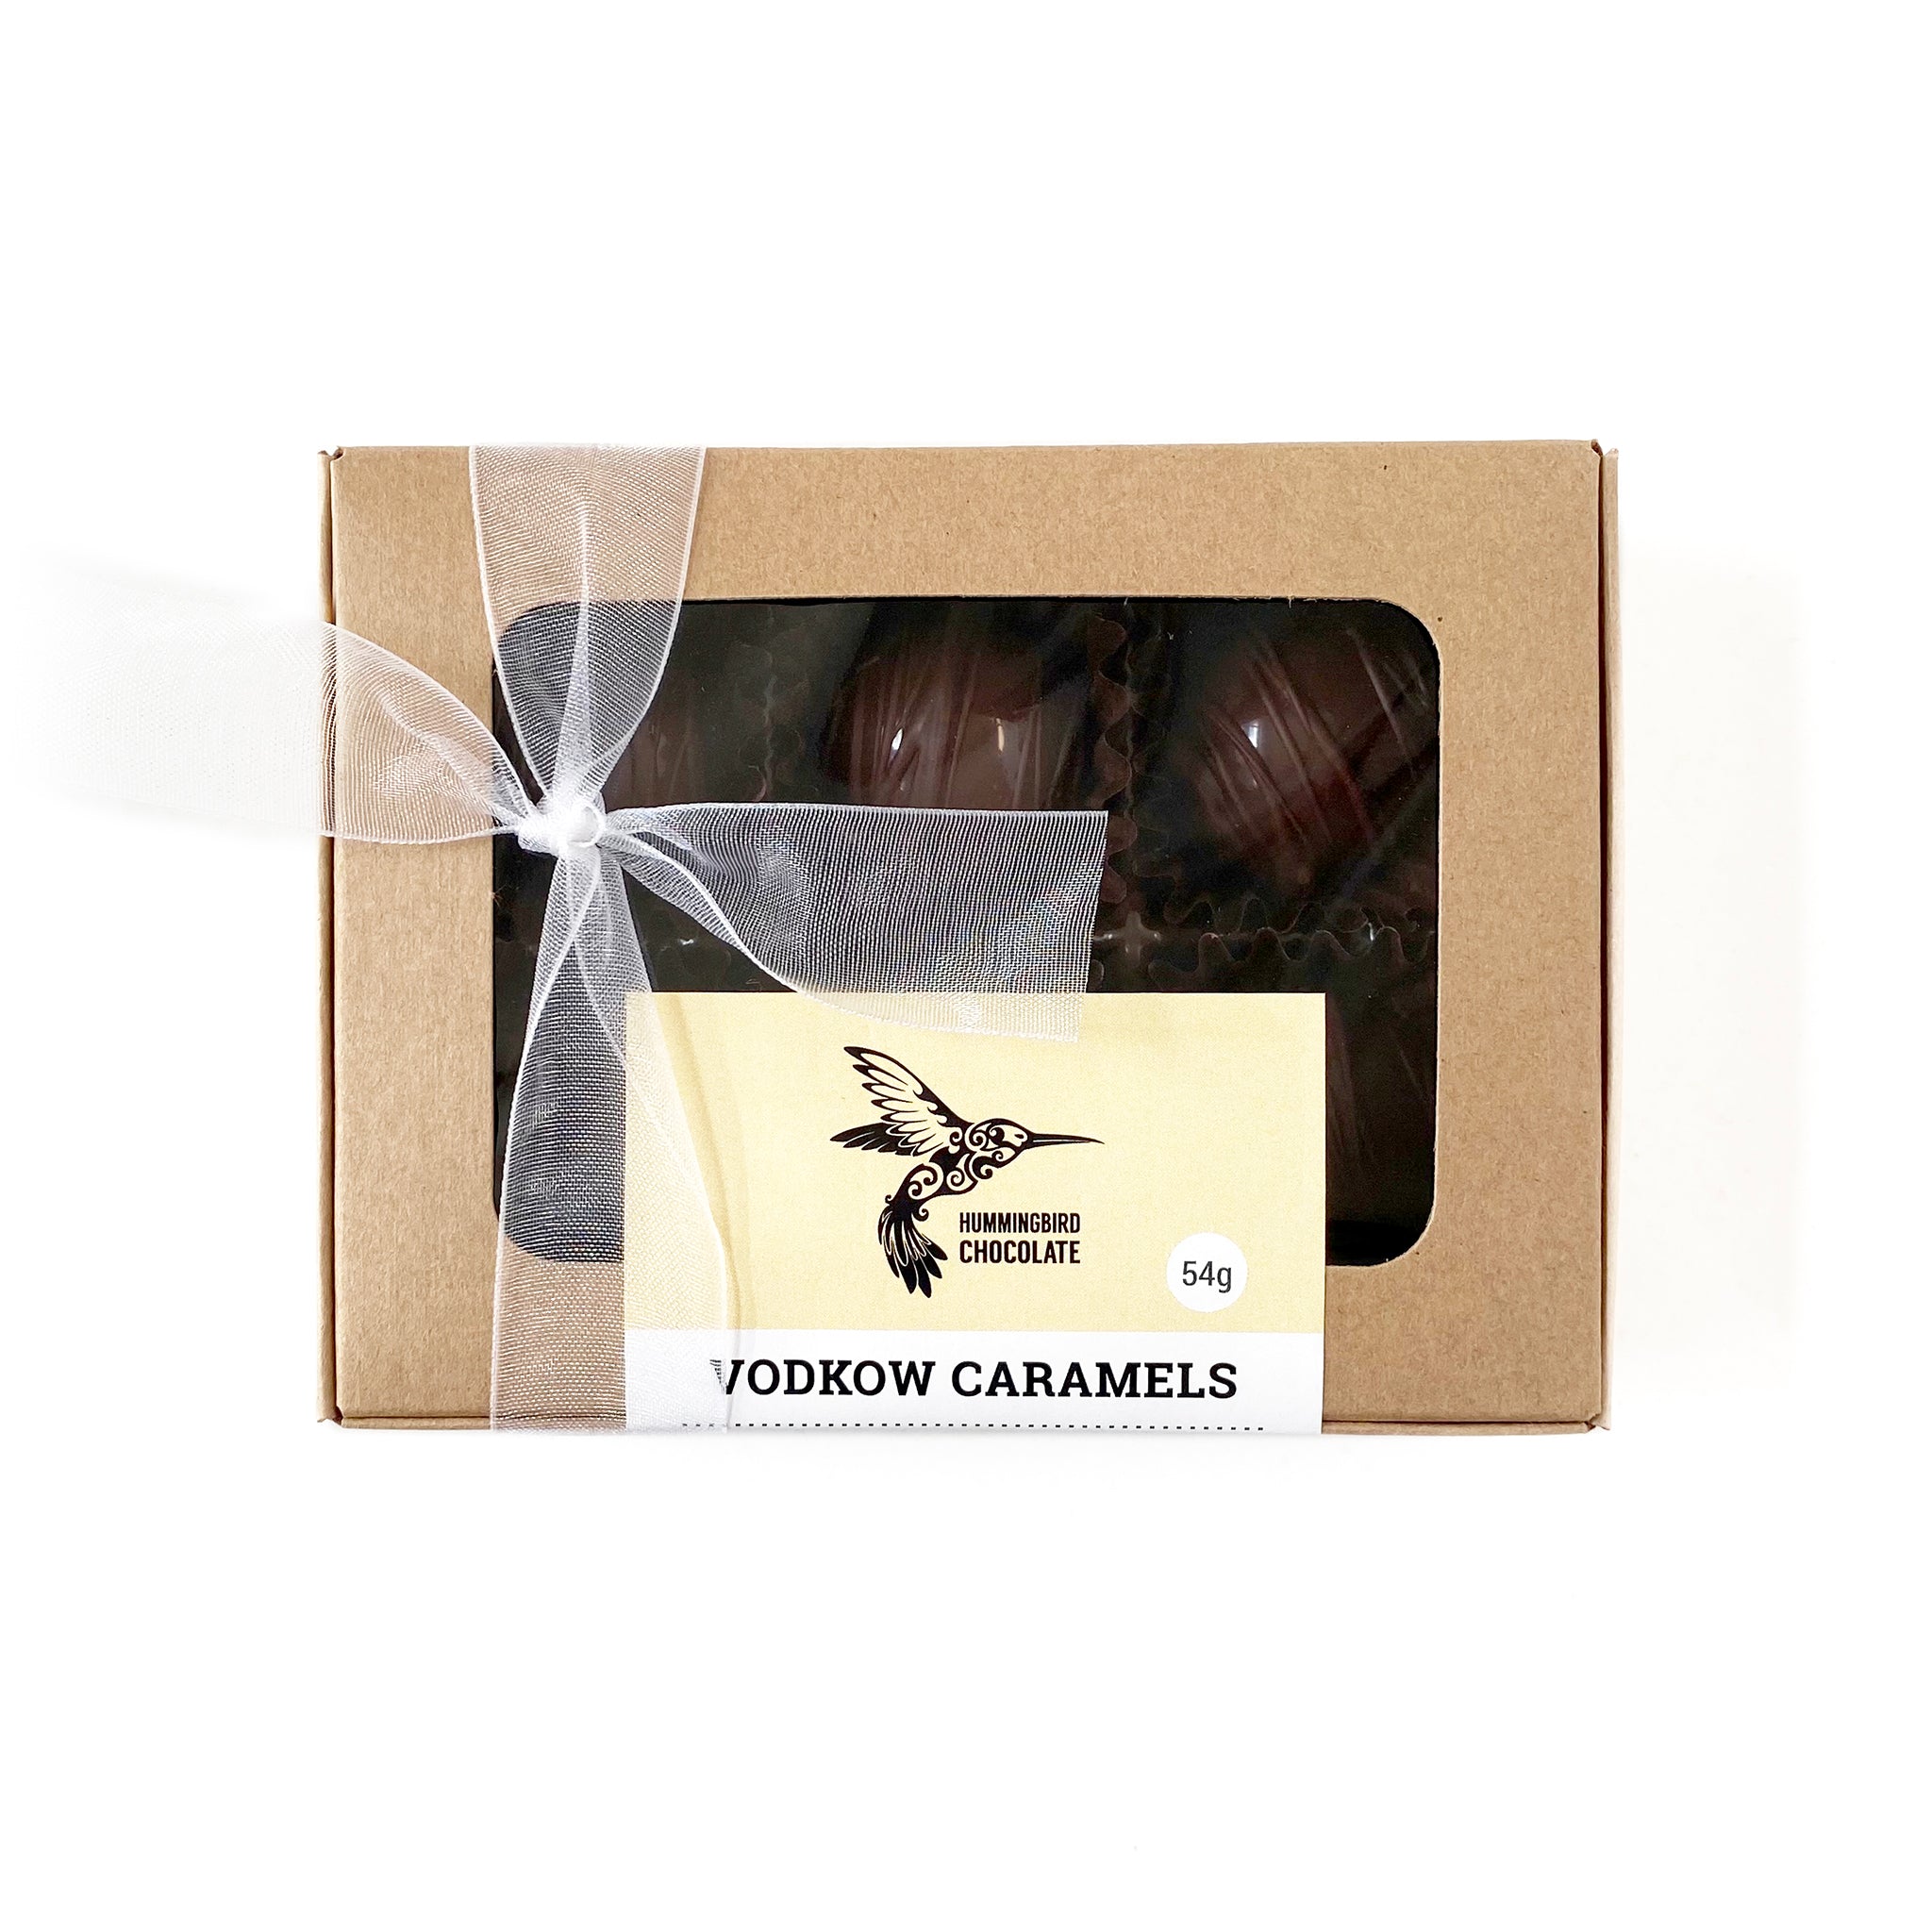 Hummingbird Chocolate Vodkow Caramels, wrapped in a kraft box and white organza bow.